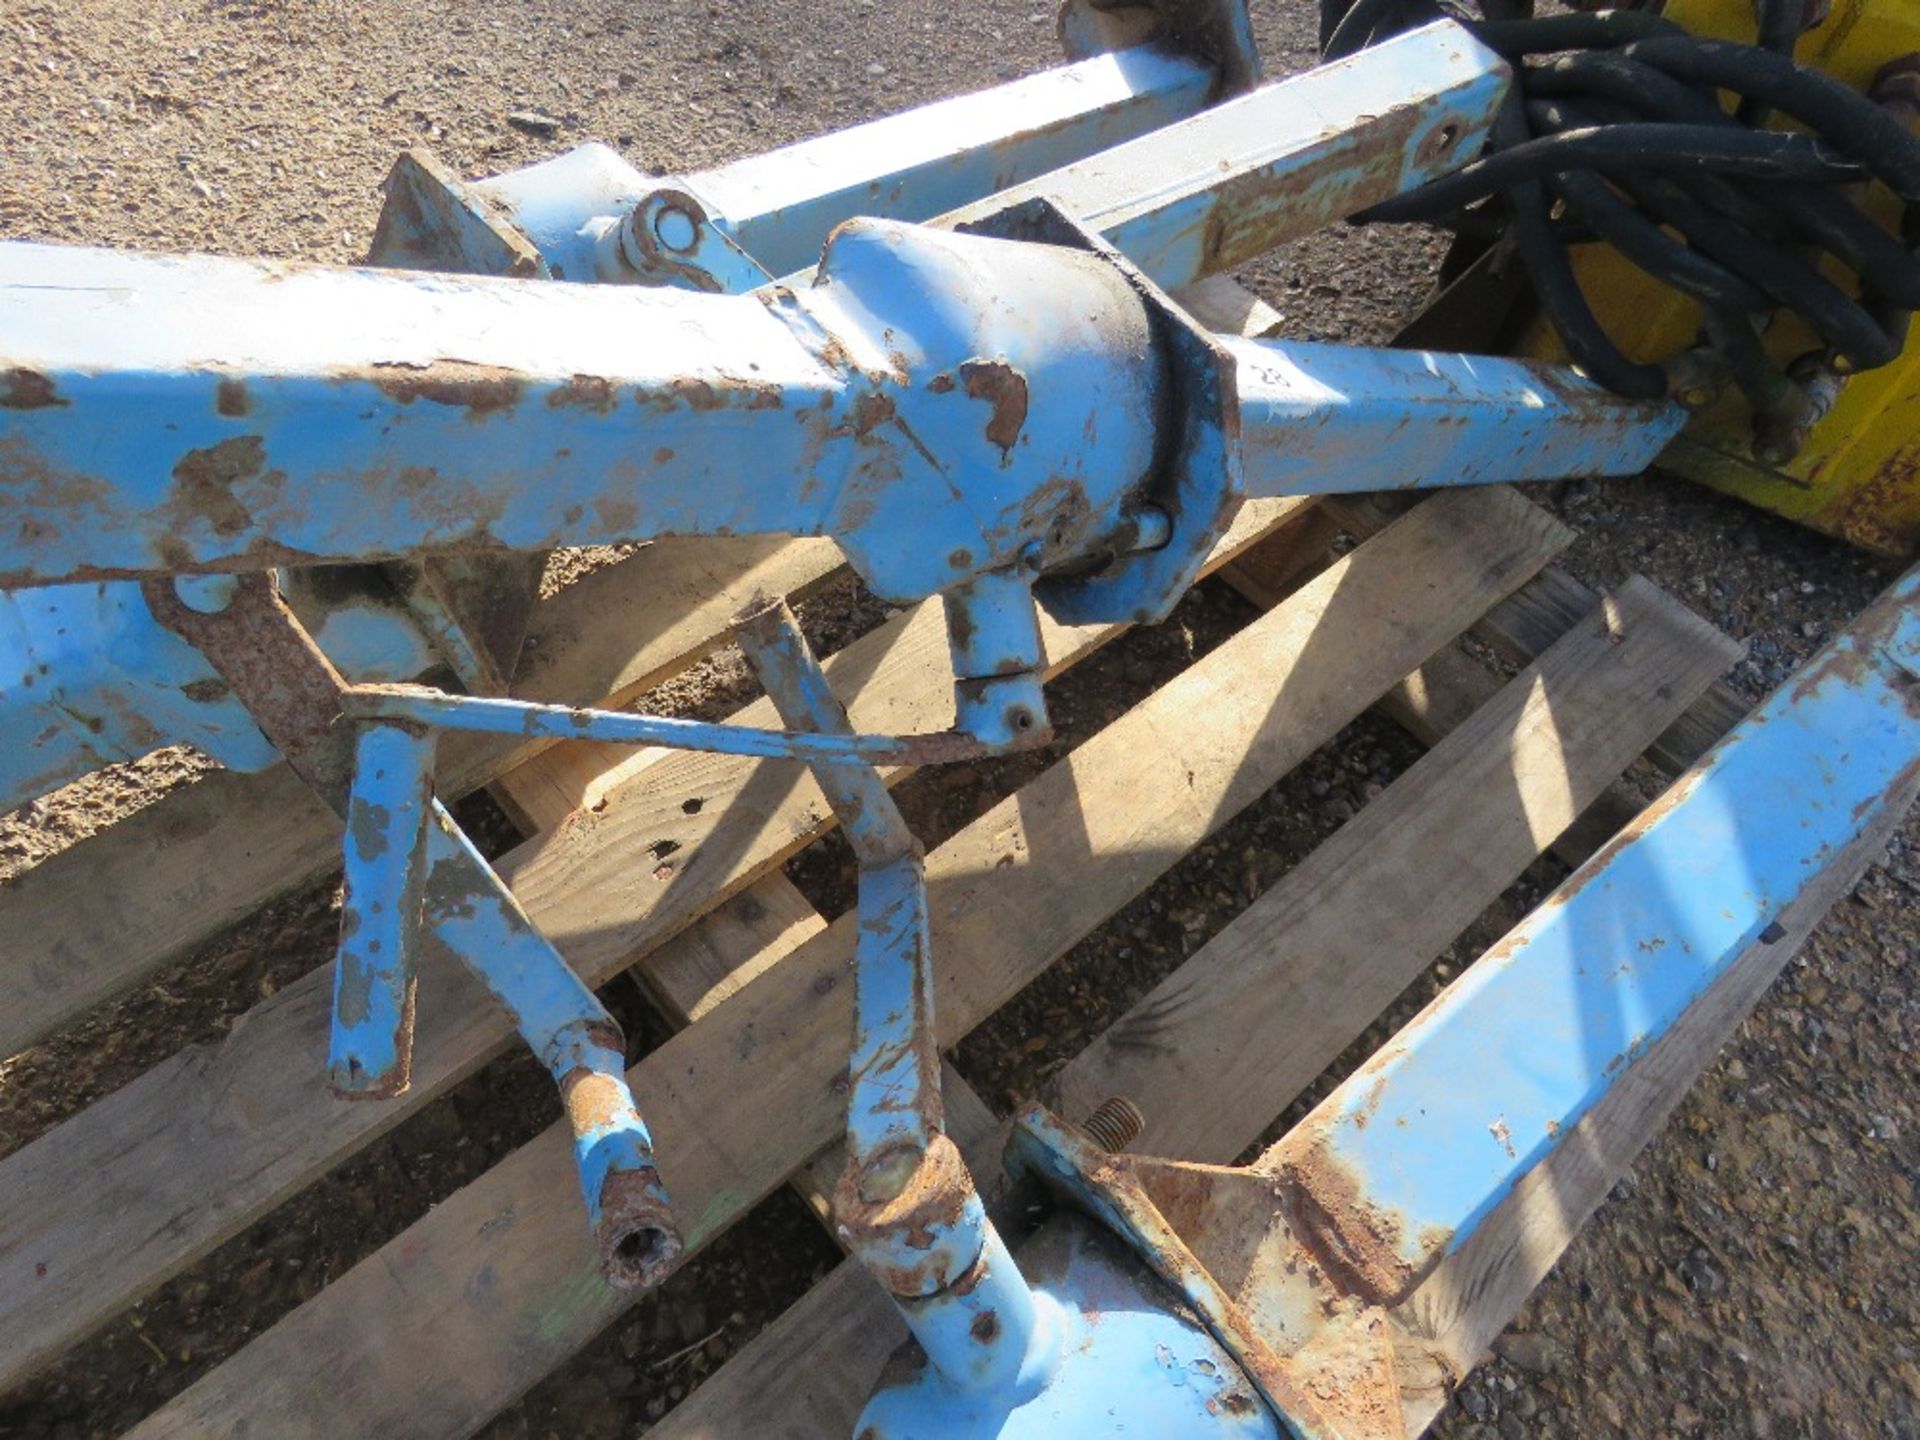 4 X ADJUSTABLE SUPPORT LEGS, 4FT CLOSED LENGTH APPROX. THIS LOT IS SOLD UNDER THE AUCTIONEERS MA - Image 5 of 5